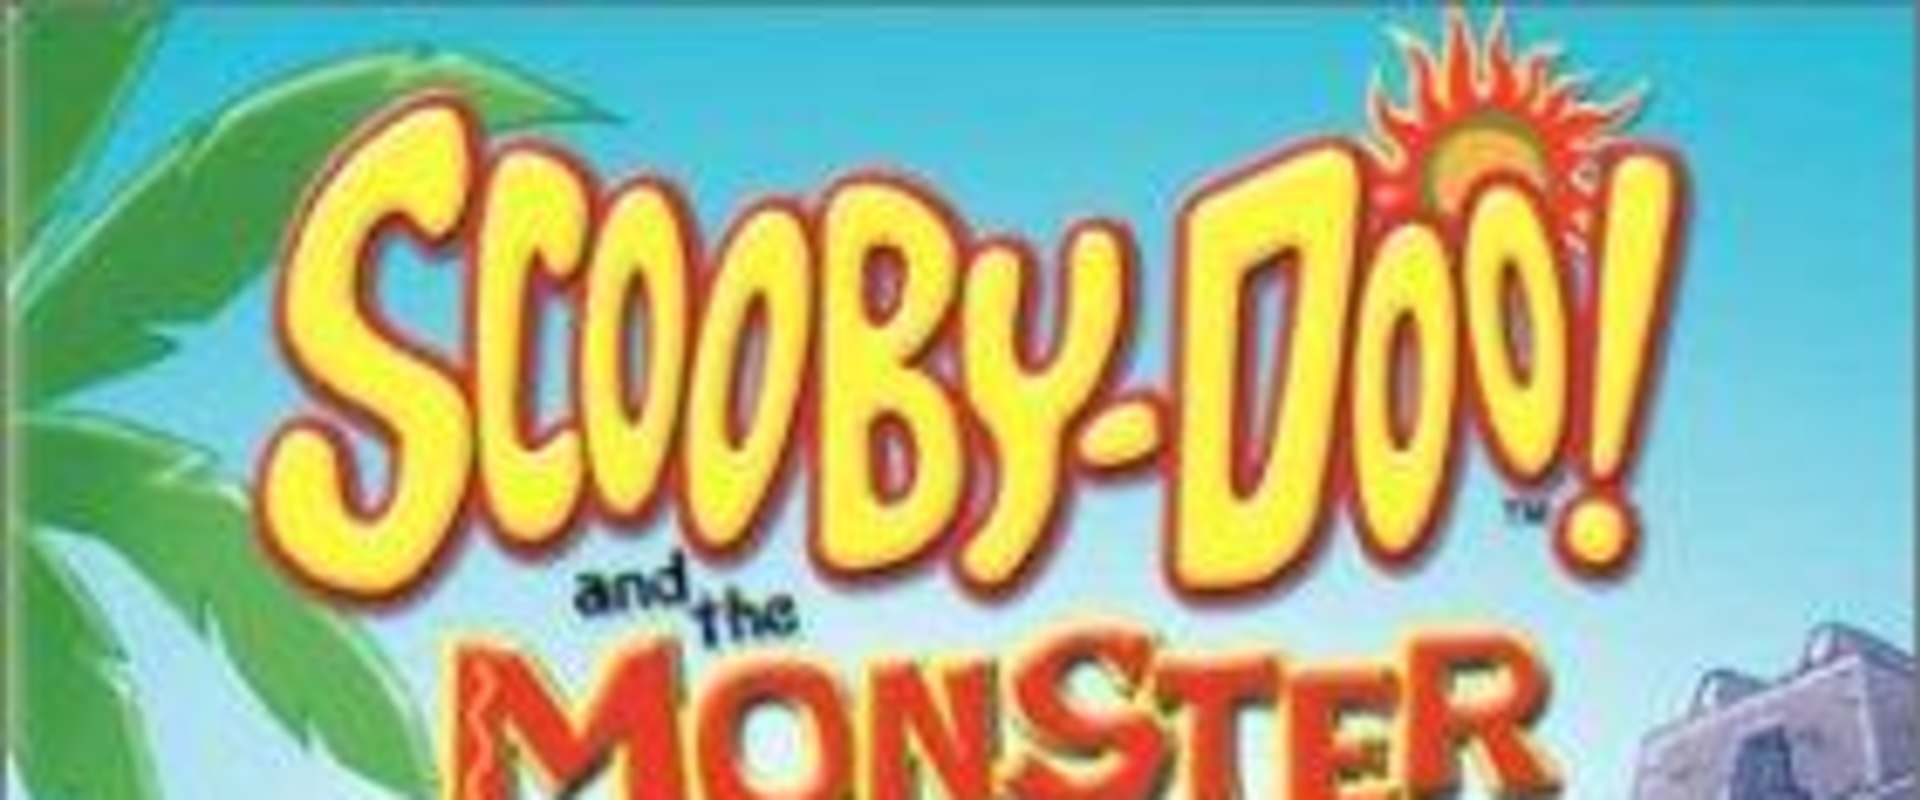 Scooby-Doo and the Monster of Mexico background 2